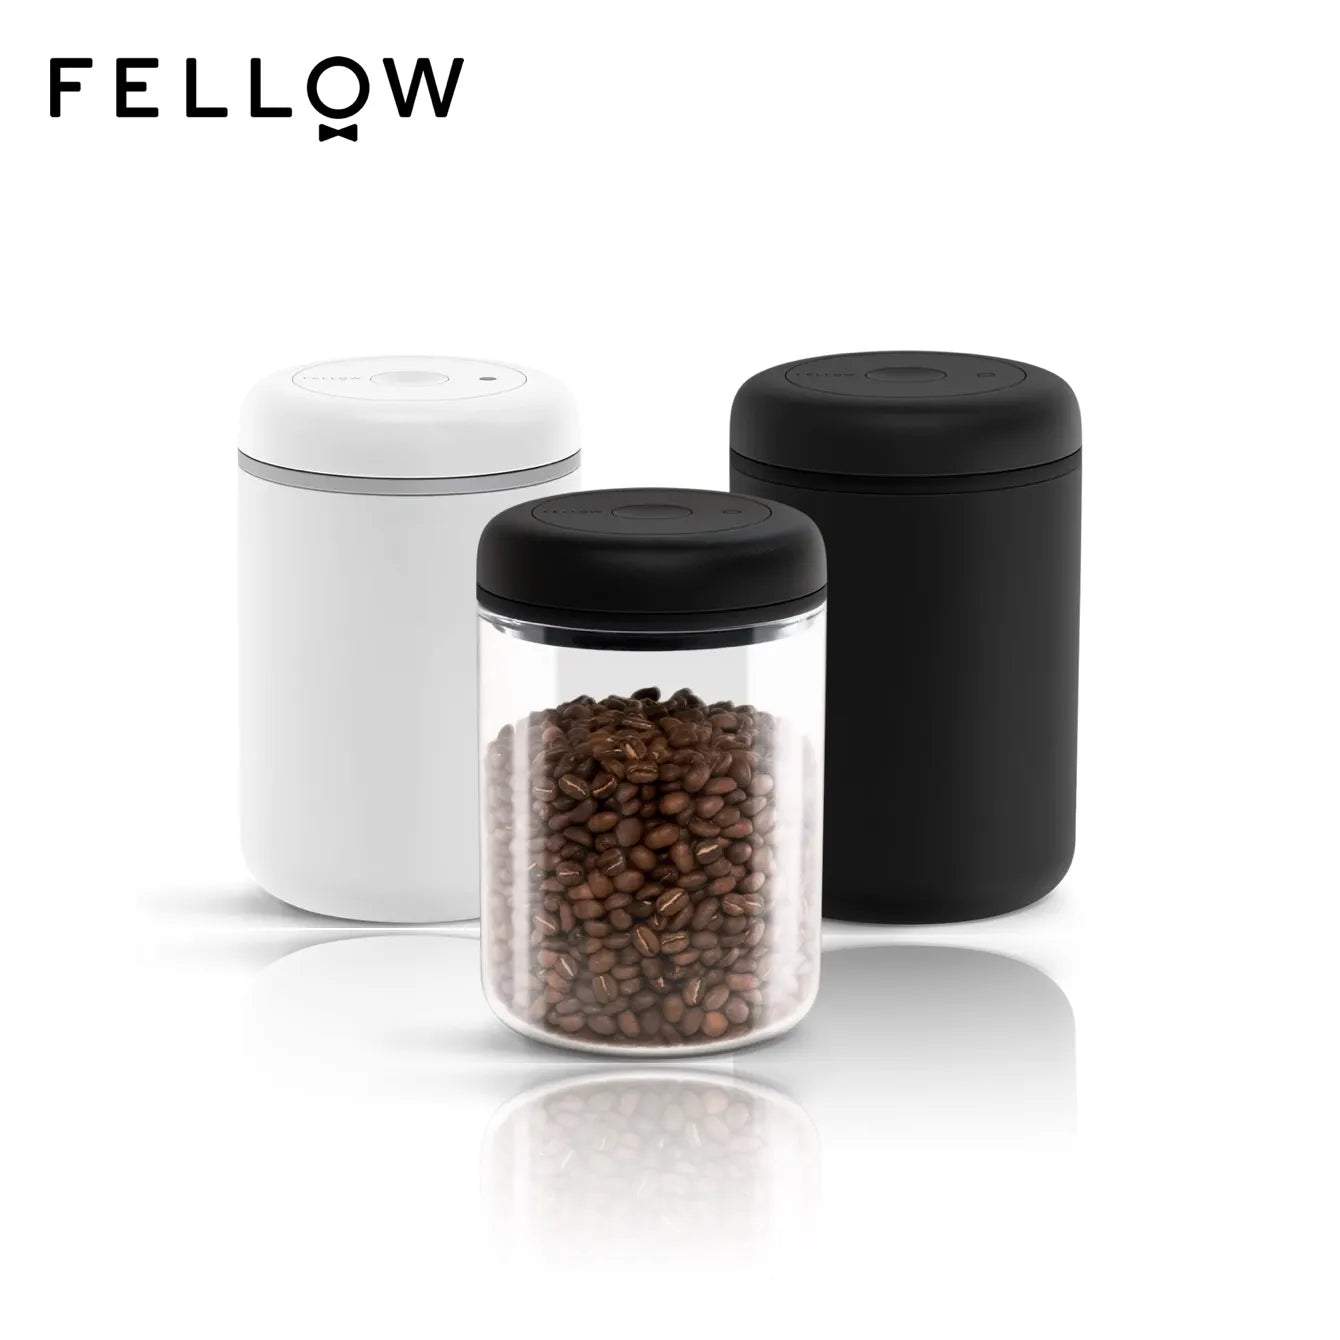 Fellow's Food Containers